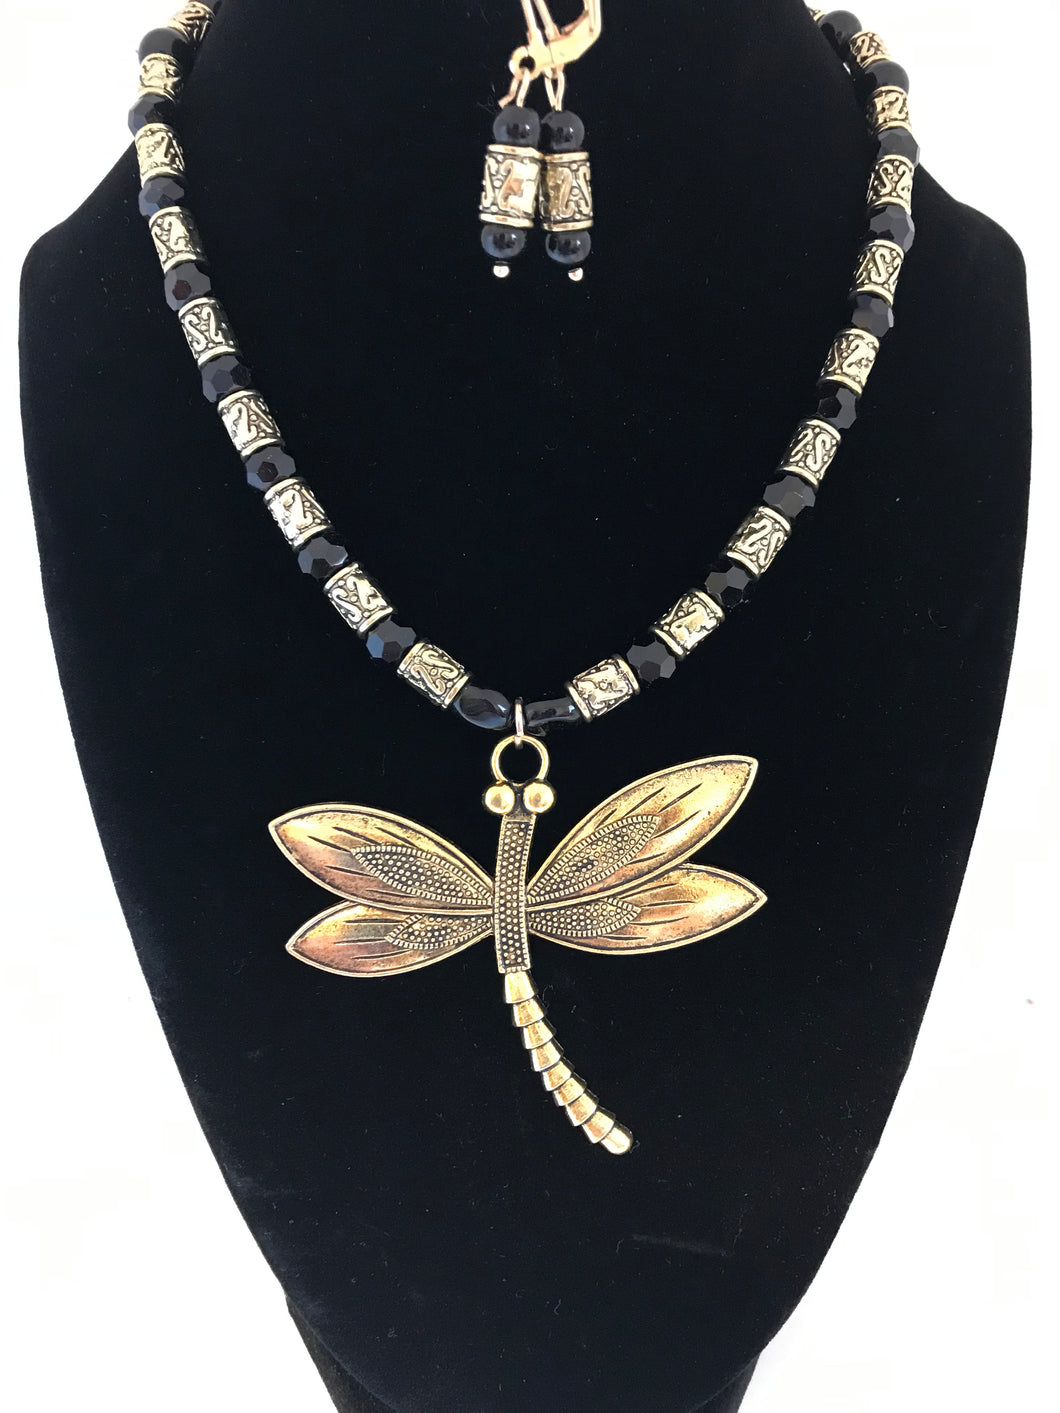 Dragonfly choker with matching earrings